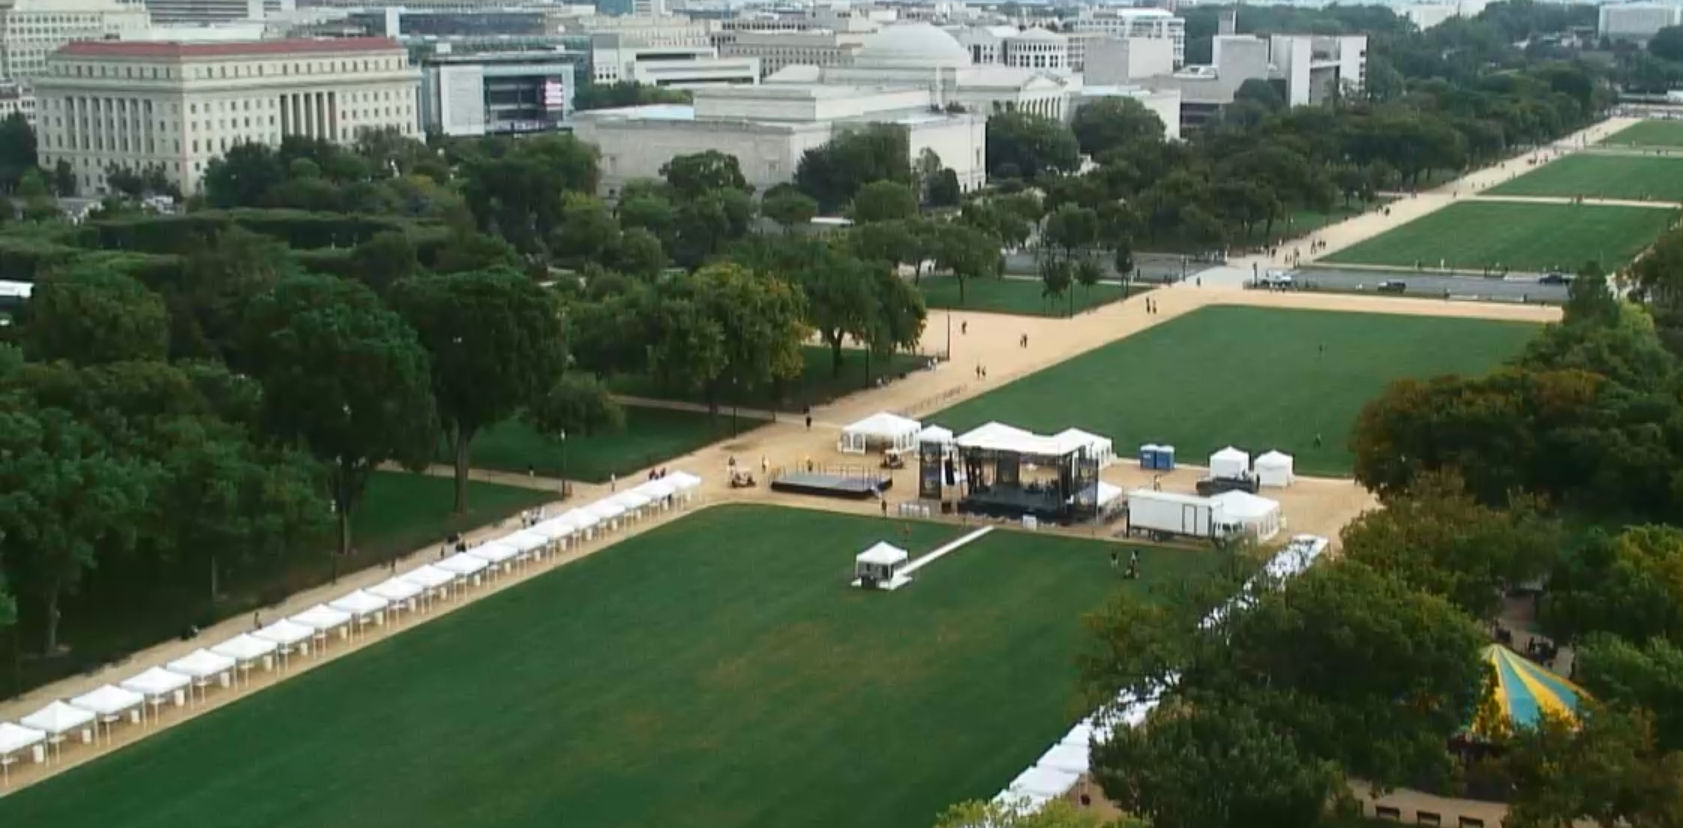 A view of the National Mall Saturday, Sept. 16, 2017, during the rally. (Courtesy EarthCam)